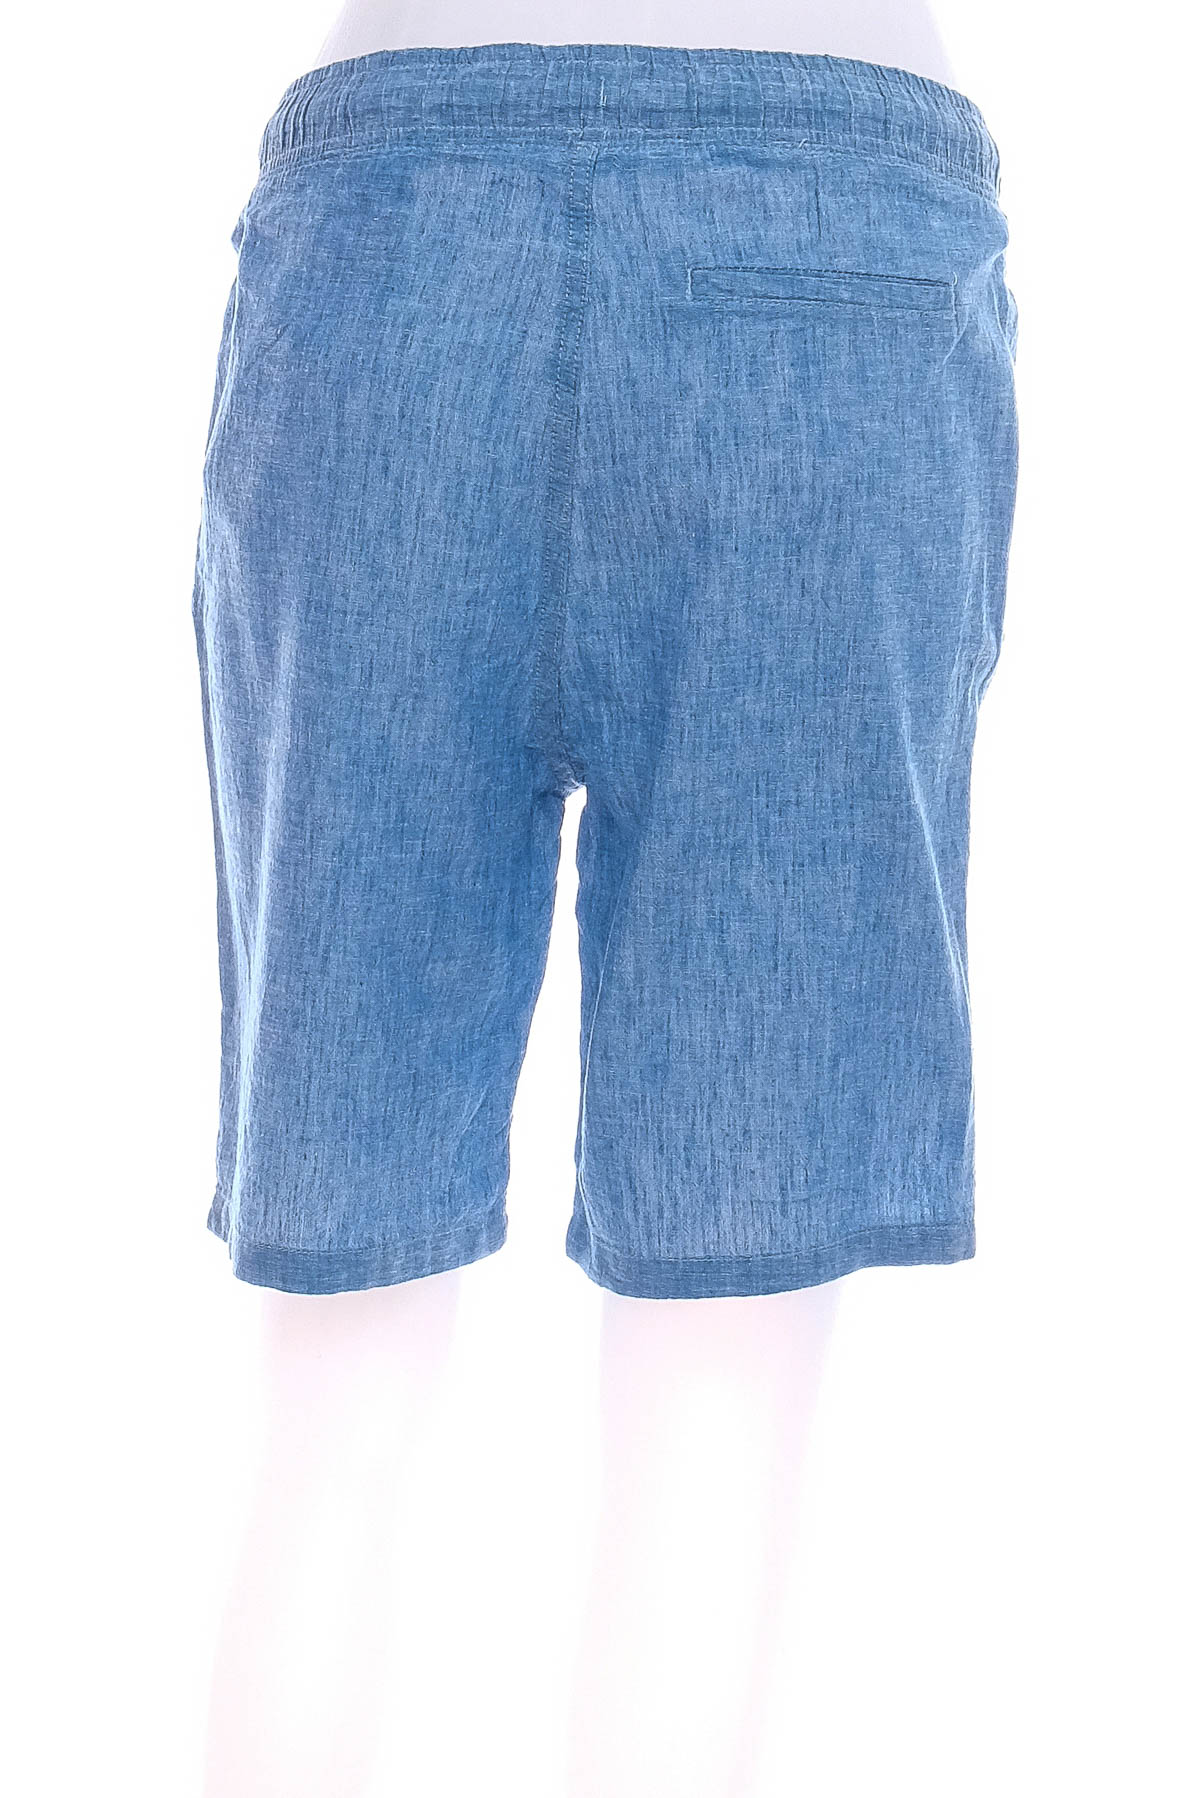 Shorts for boys - H&M - 1